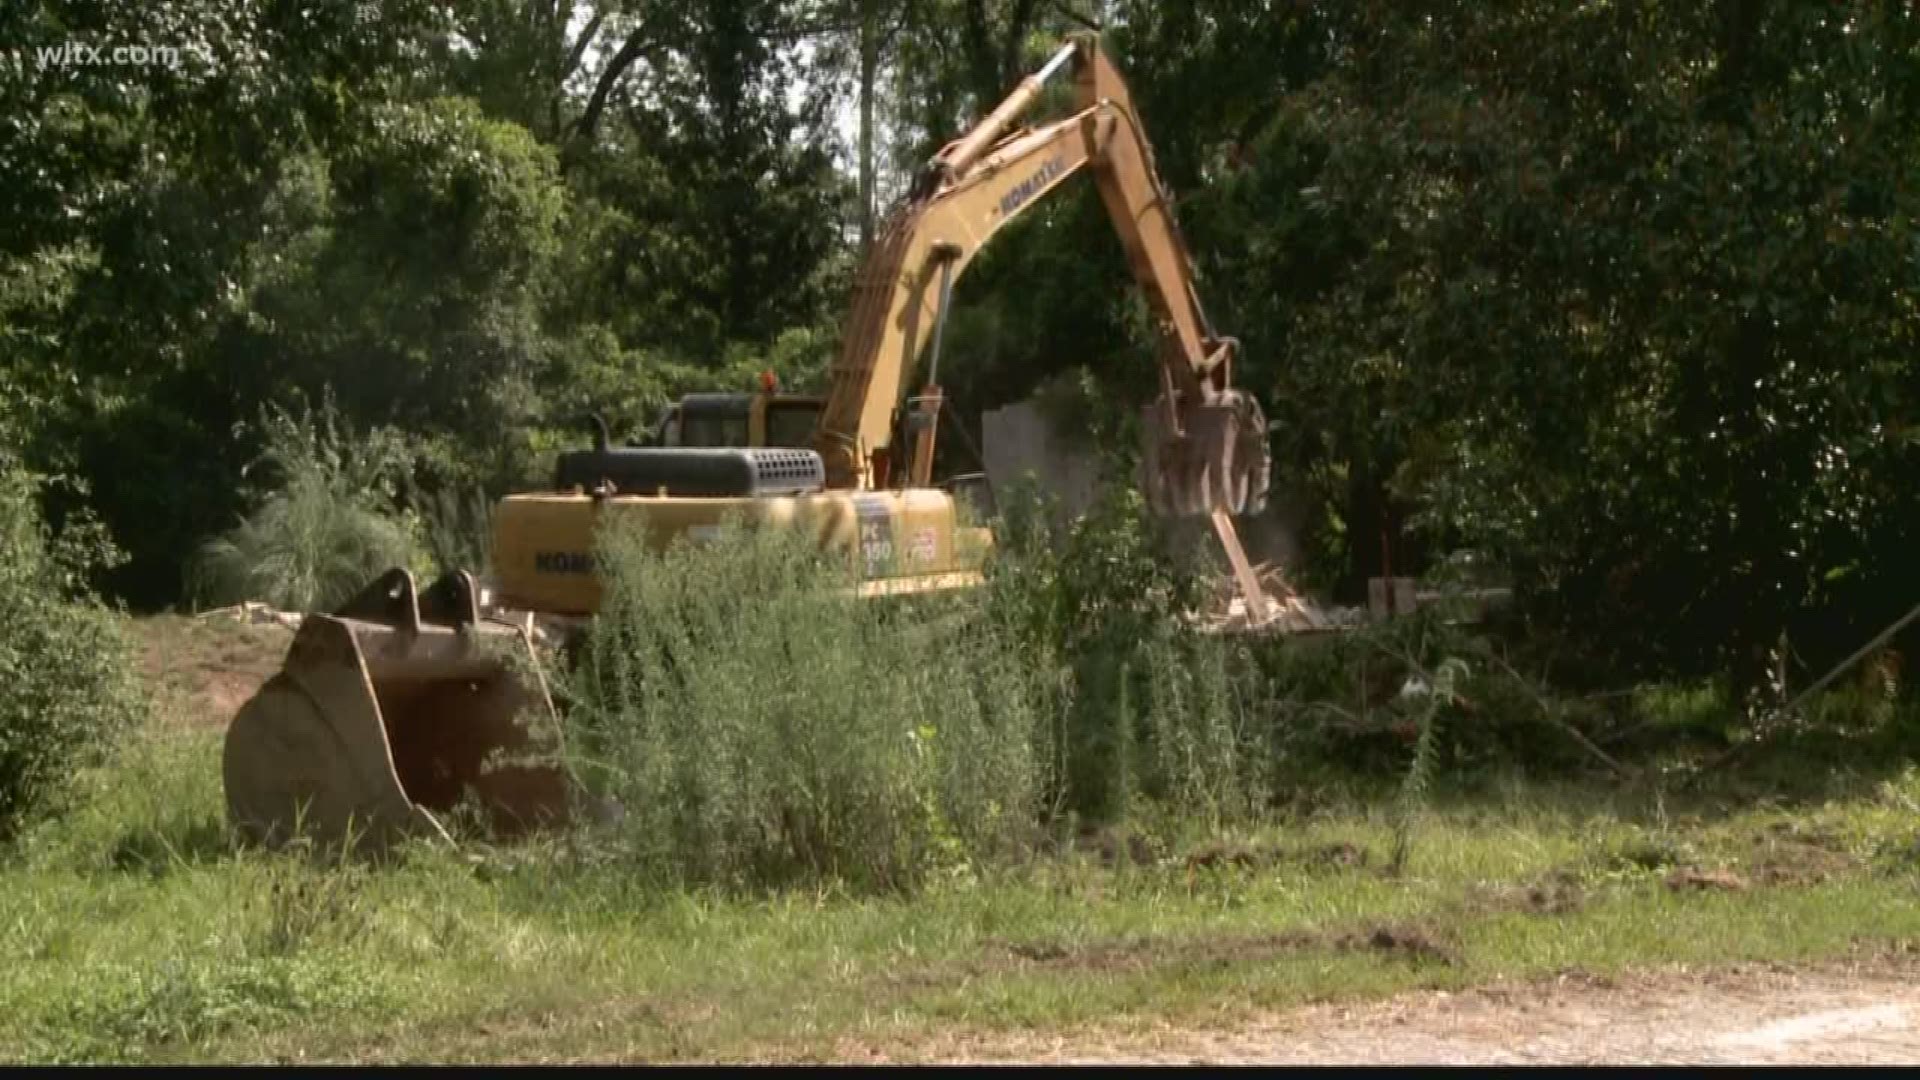 A Columbia neighborhood is getting cleaned up, nearly 4 years later.